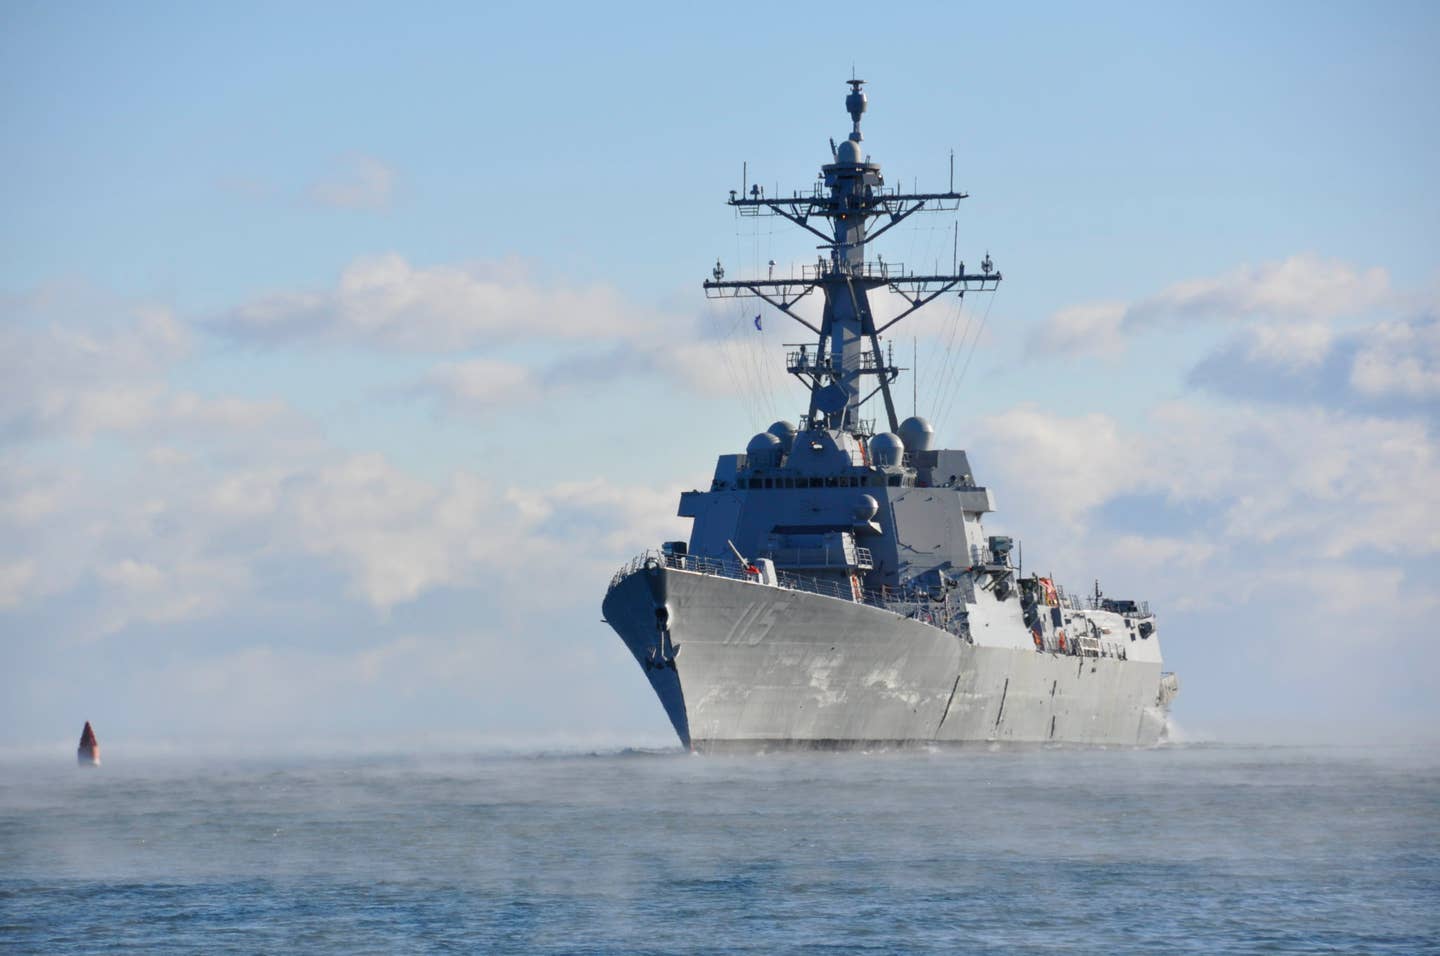 USS Rafael Peralta (DDG 115) successfully completed acceptance trials after spending two days underway off the coast of Maine. (U.S. Navy photo)